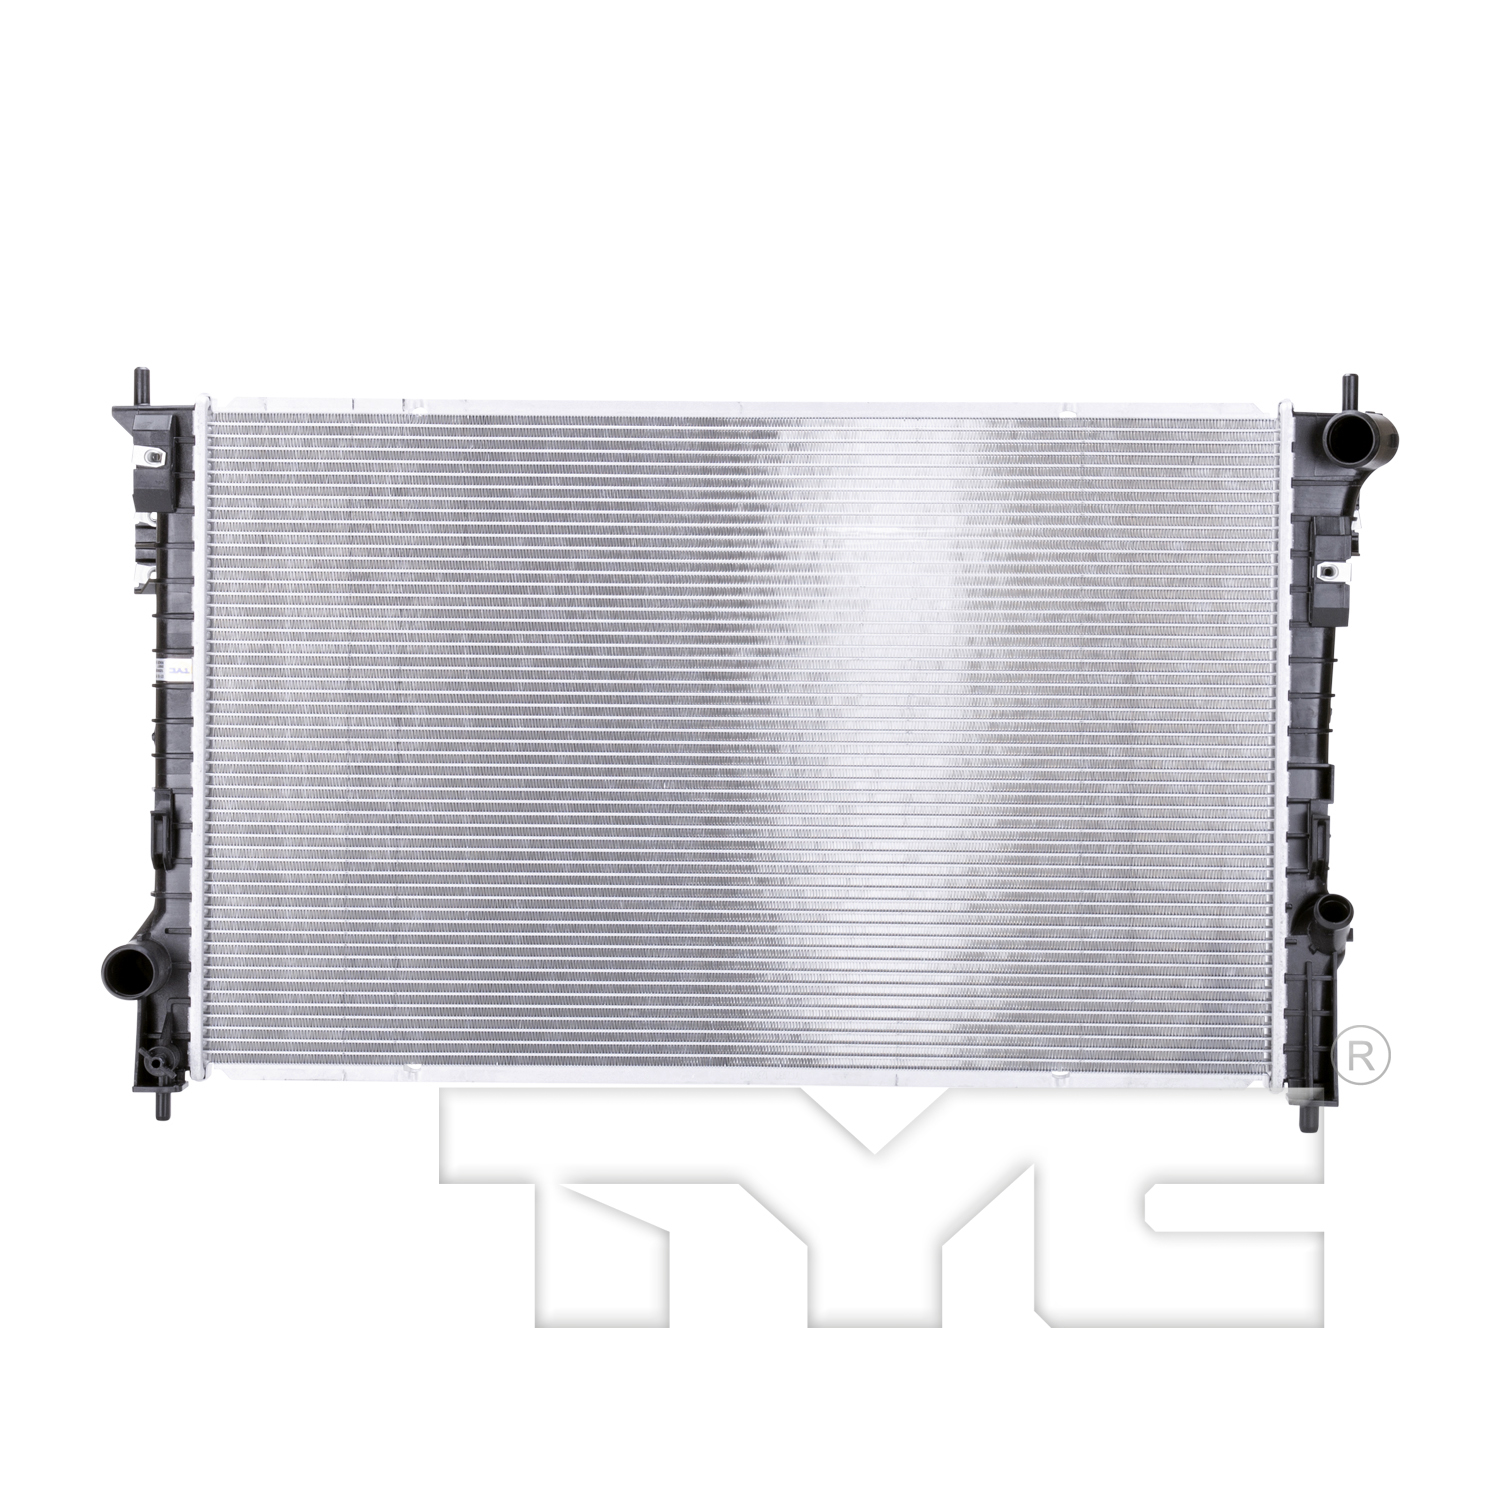 Aftermarket RADIATORS for LINCOLN - MKX, MKX,07-12,Radiator assembly